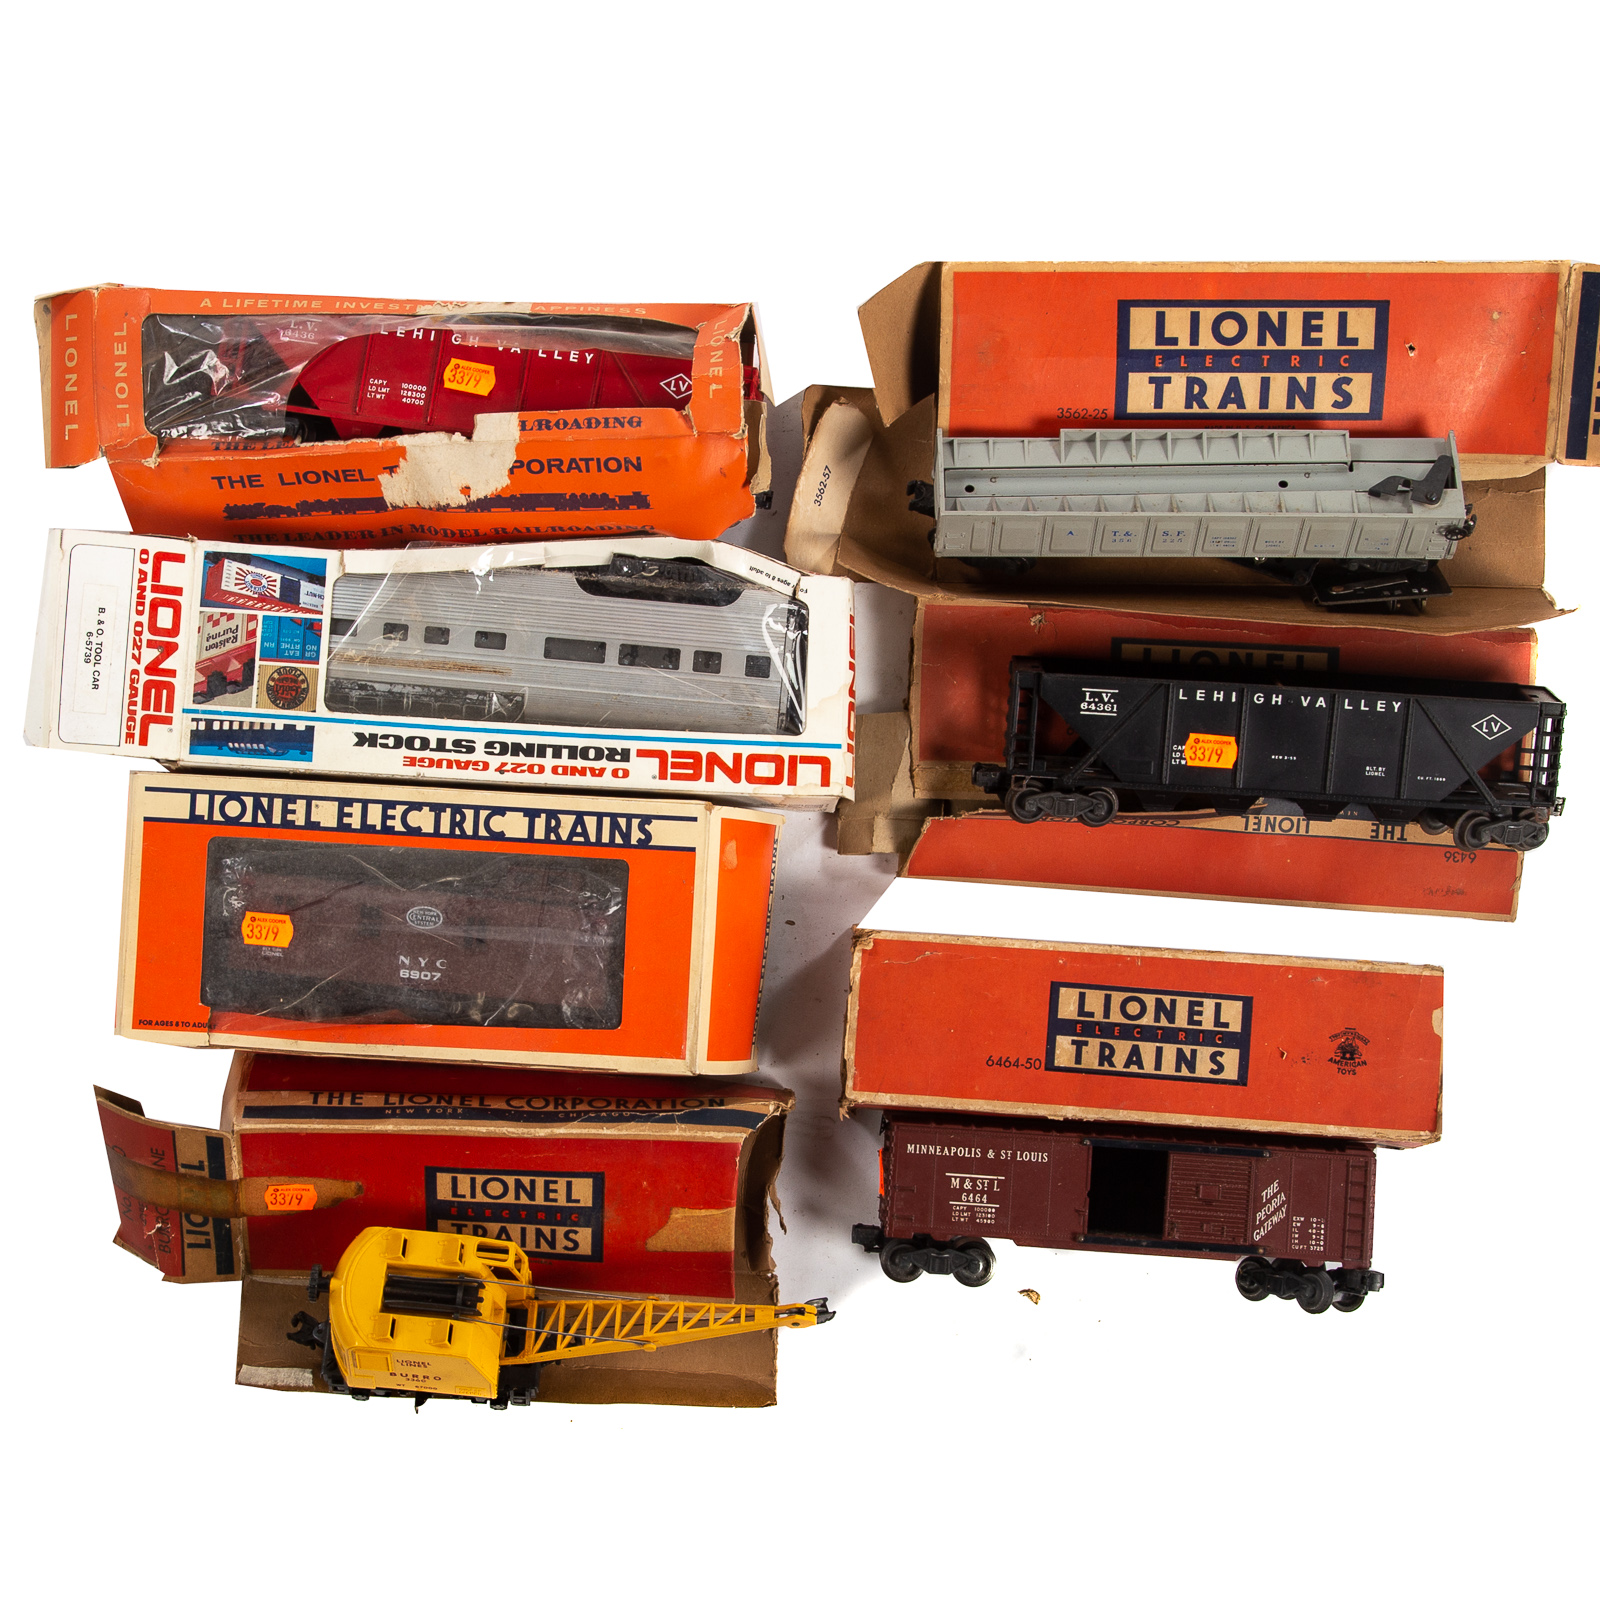 SIX LIONEL FREIGHT CARS Including 36a148